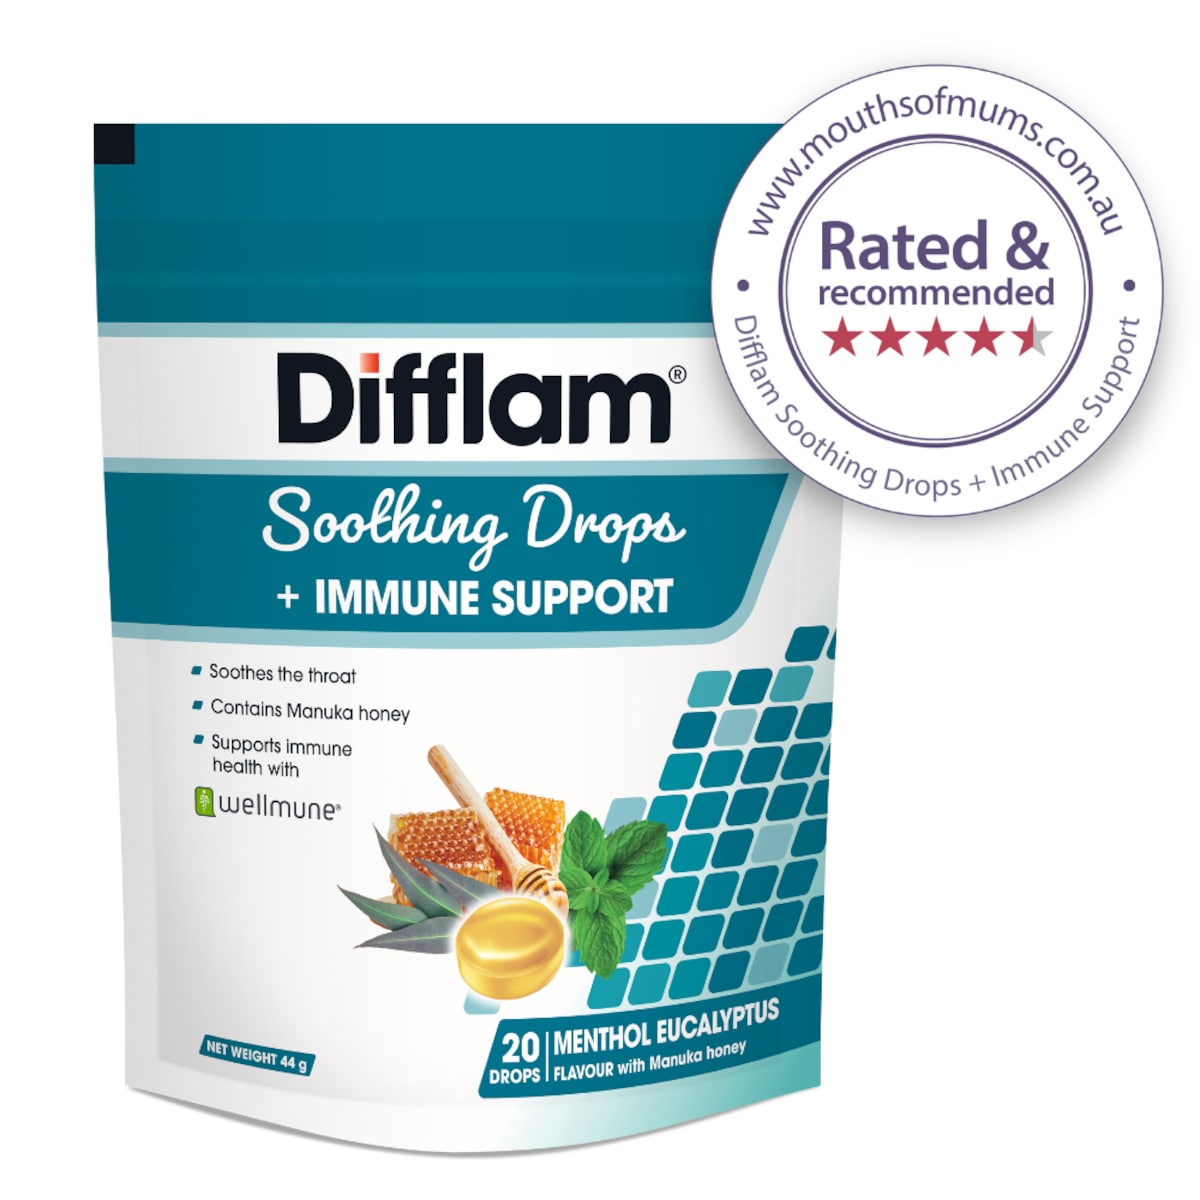 Difflam Soothing Drops + Immune Support Menthol Eucalyptus 20 Pack